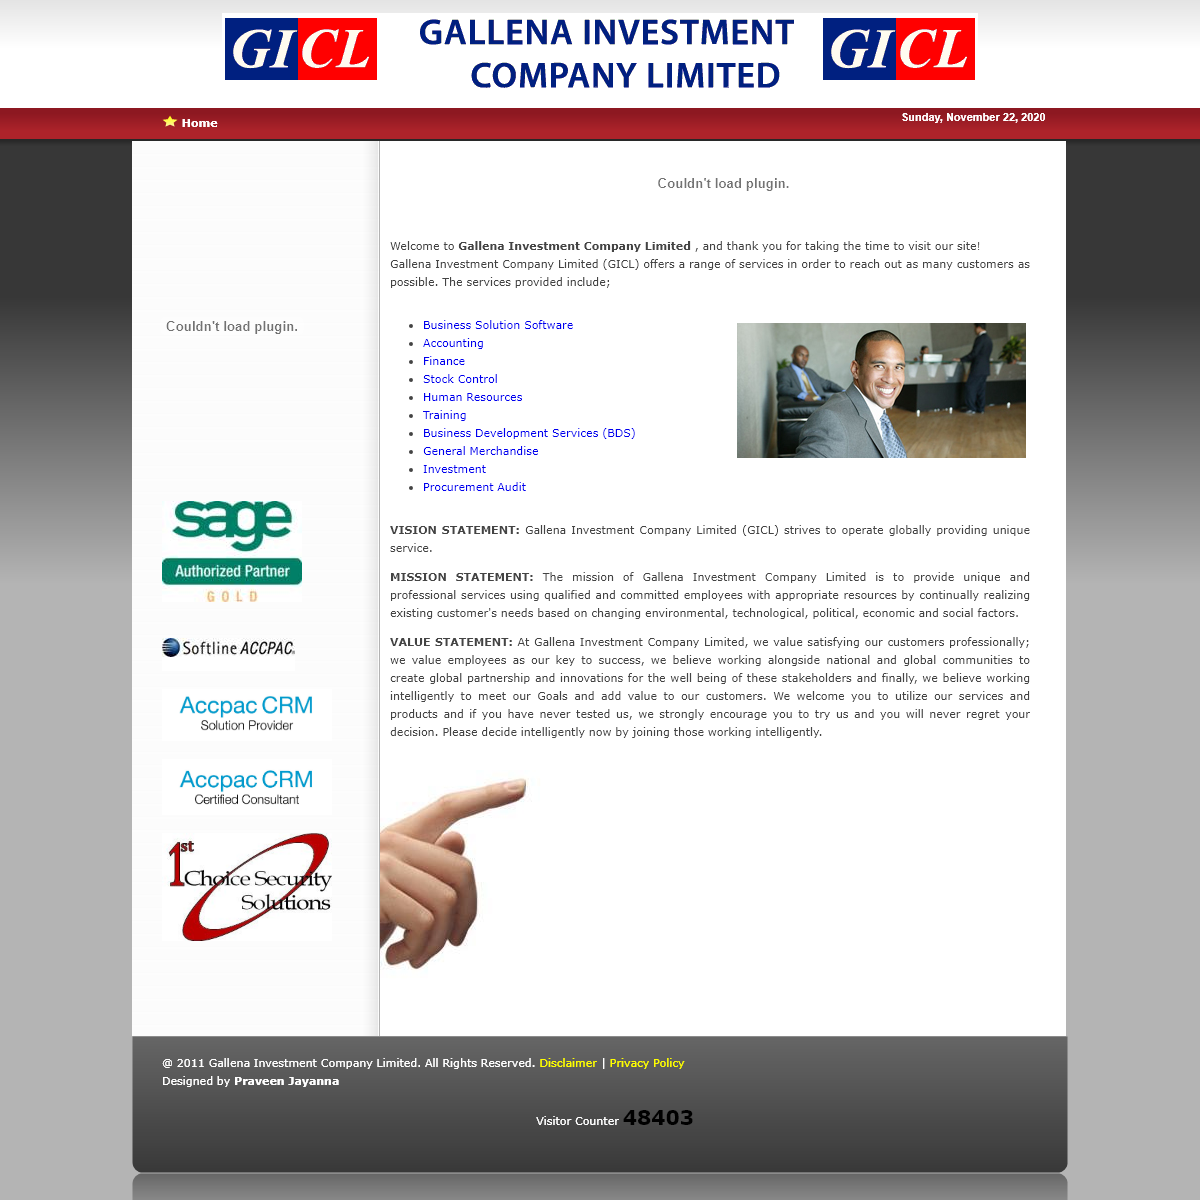 A complete backup of gallenainvestment.com